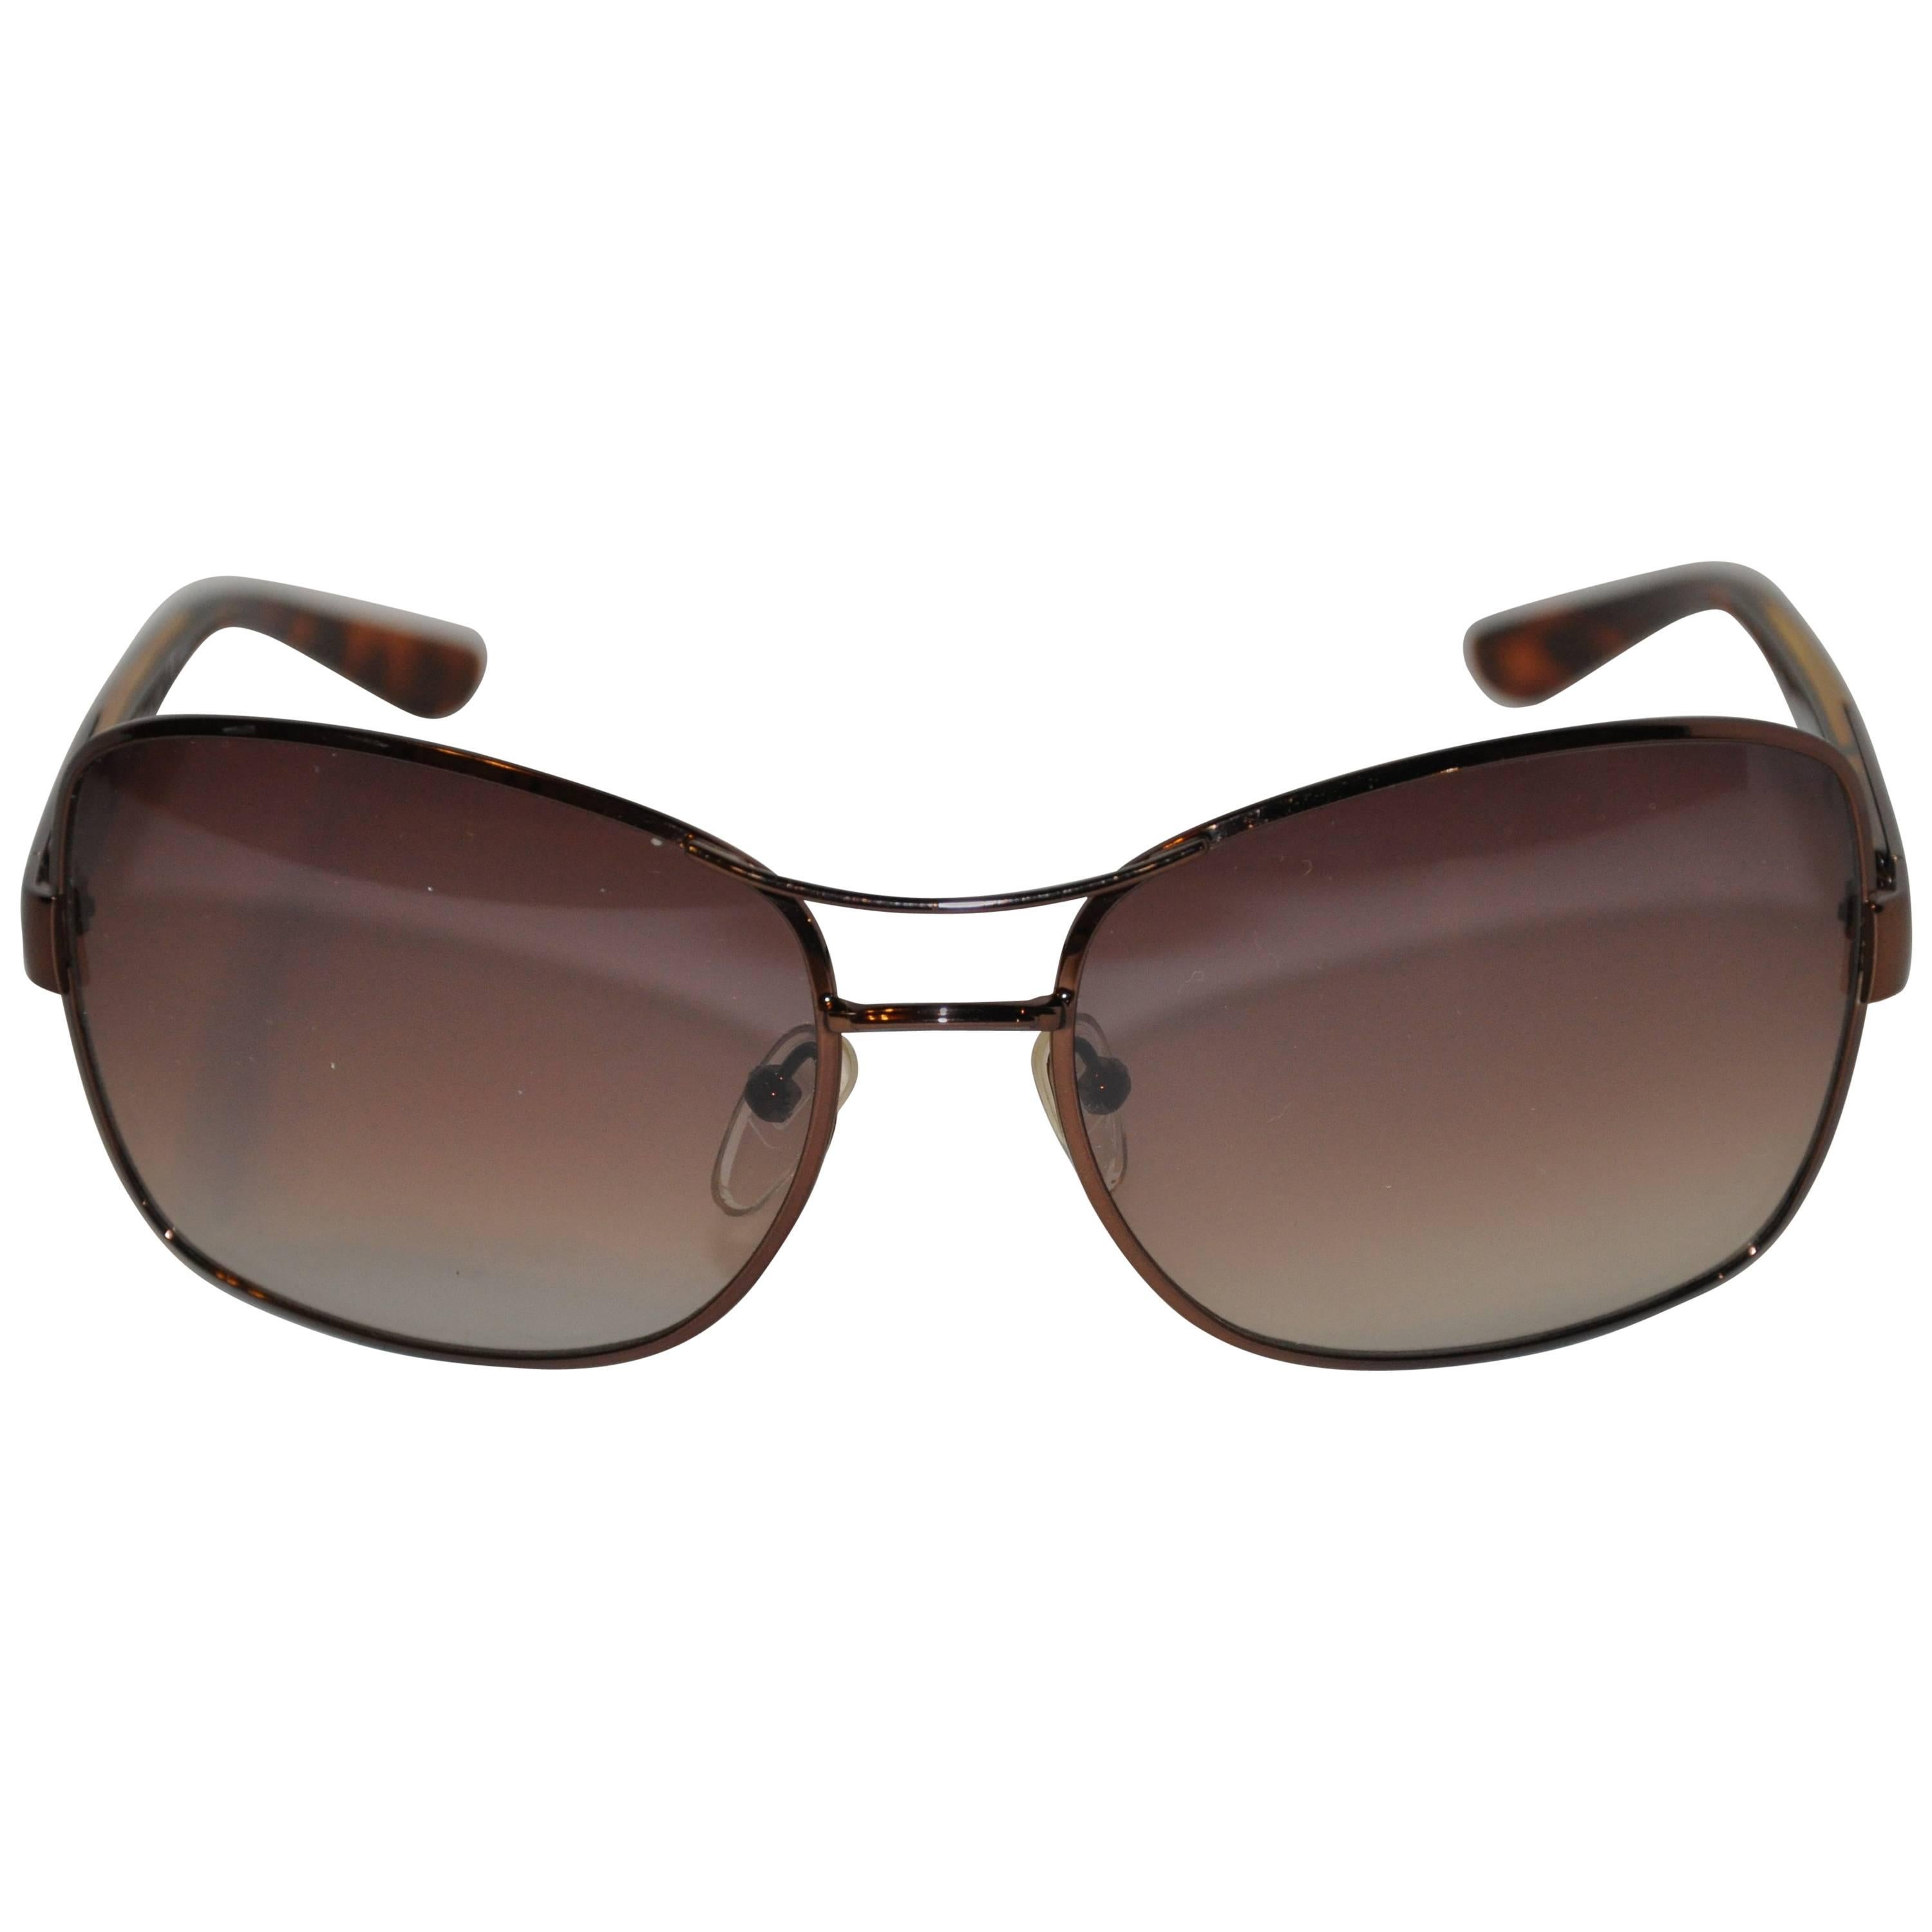 Valentino Smoked Hardware Accented with Tortoise Shell Sunglasses